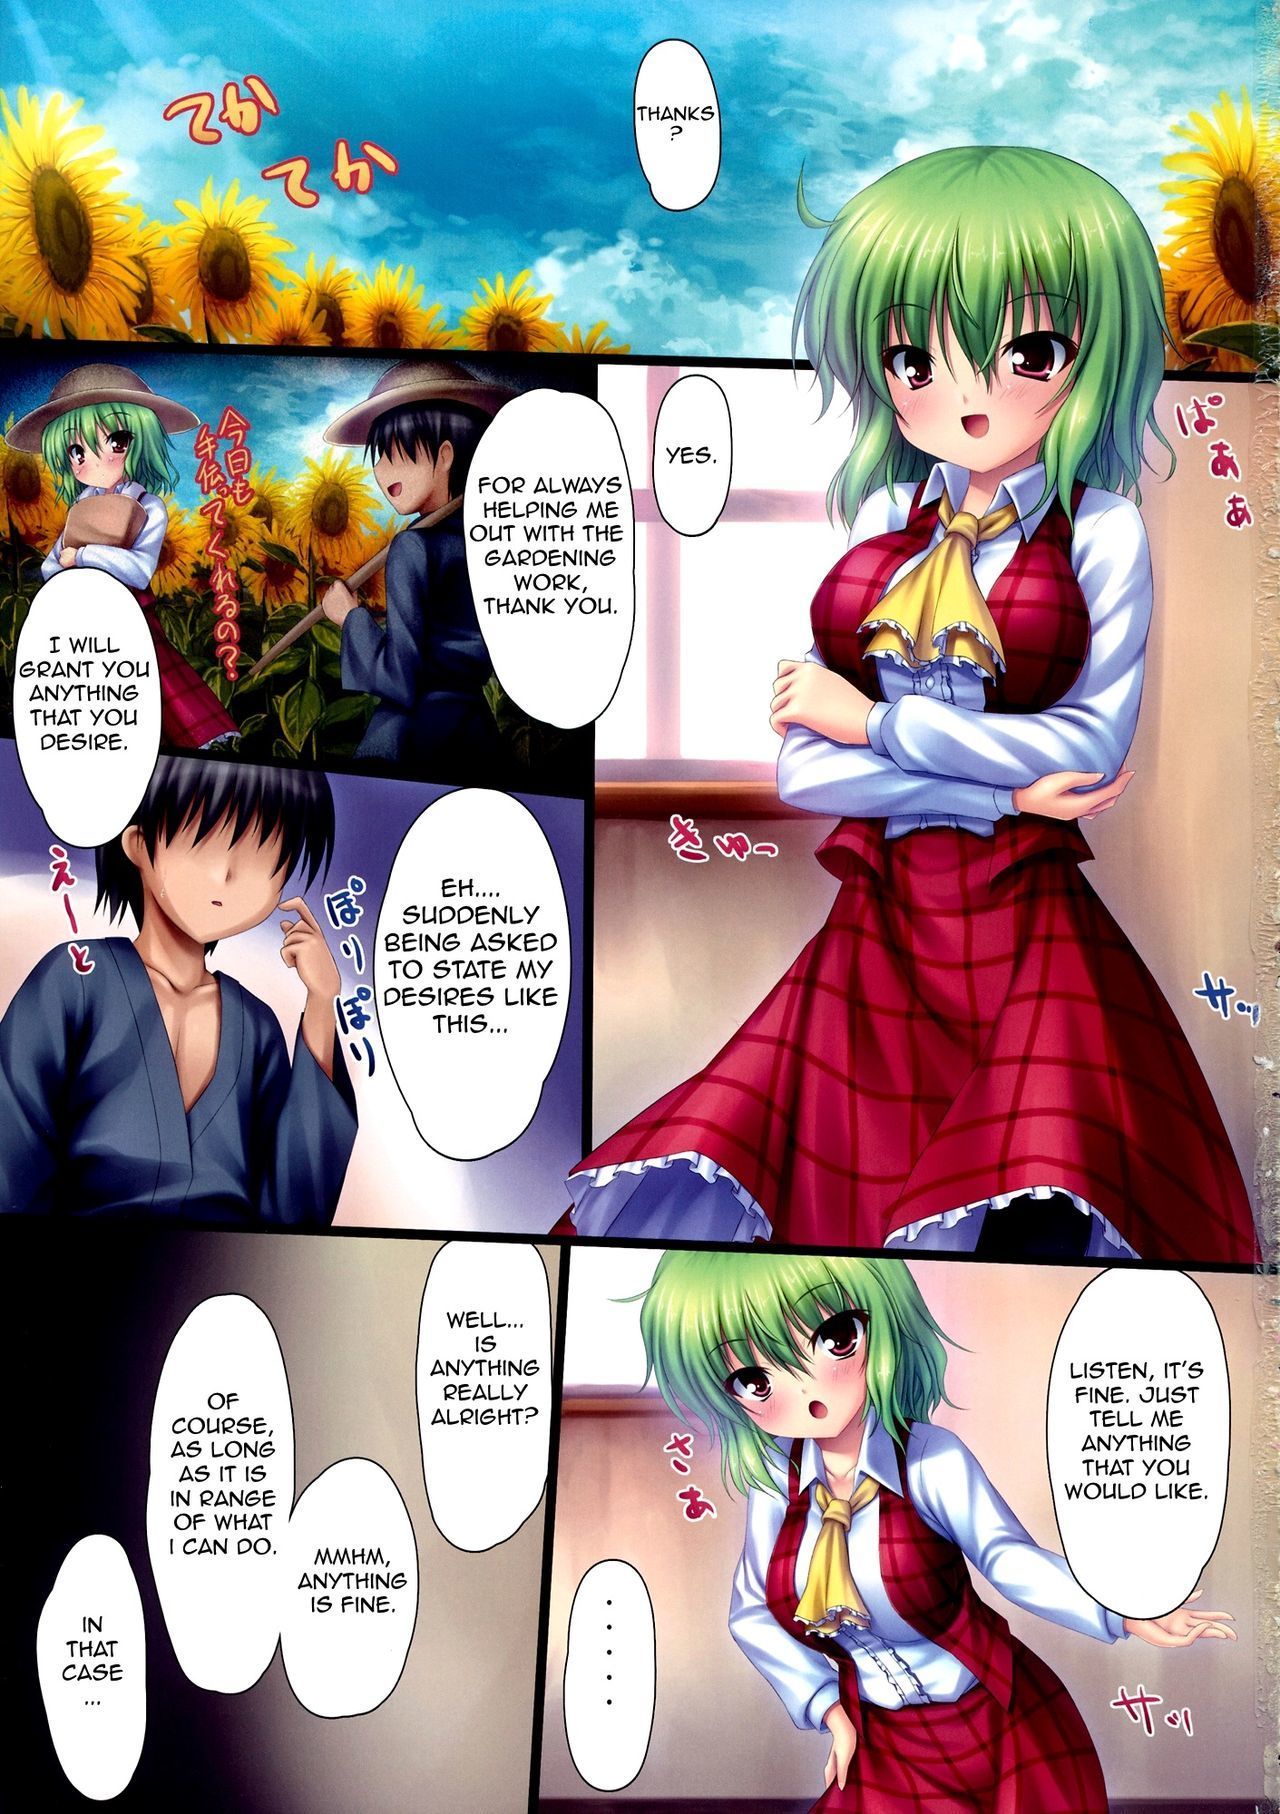 (c81) 16000 모든 (takeponian) y (touhou project)